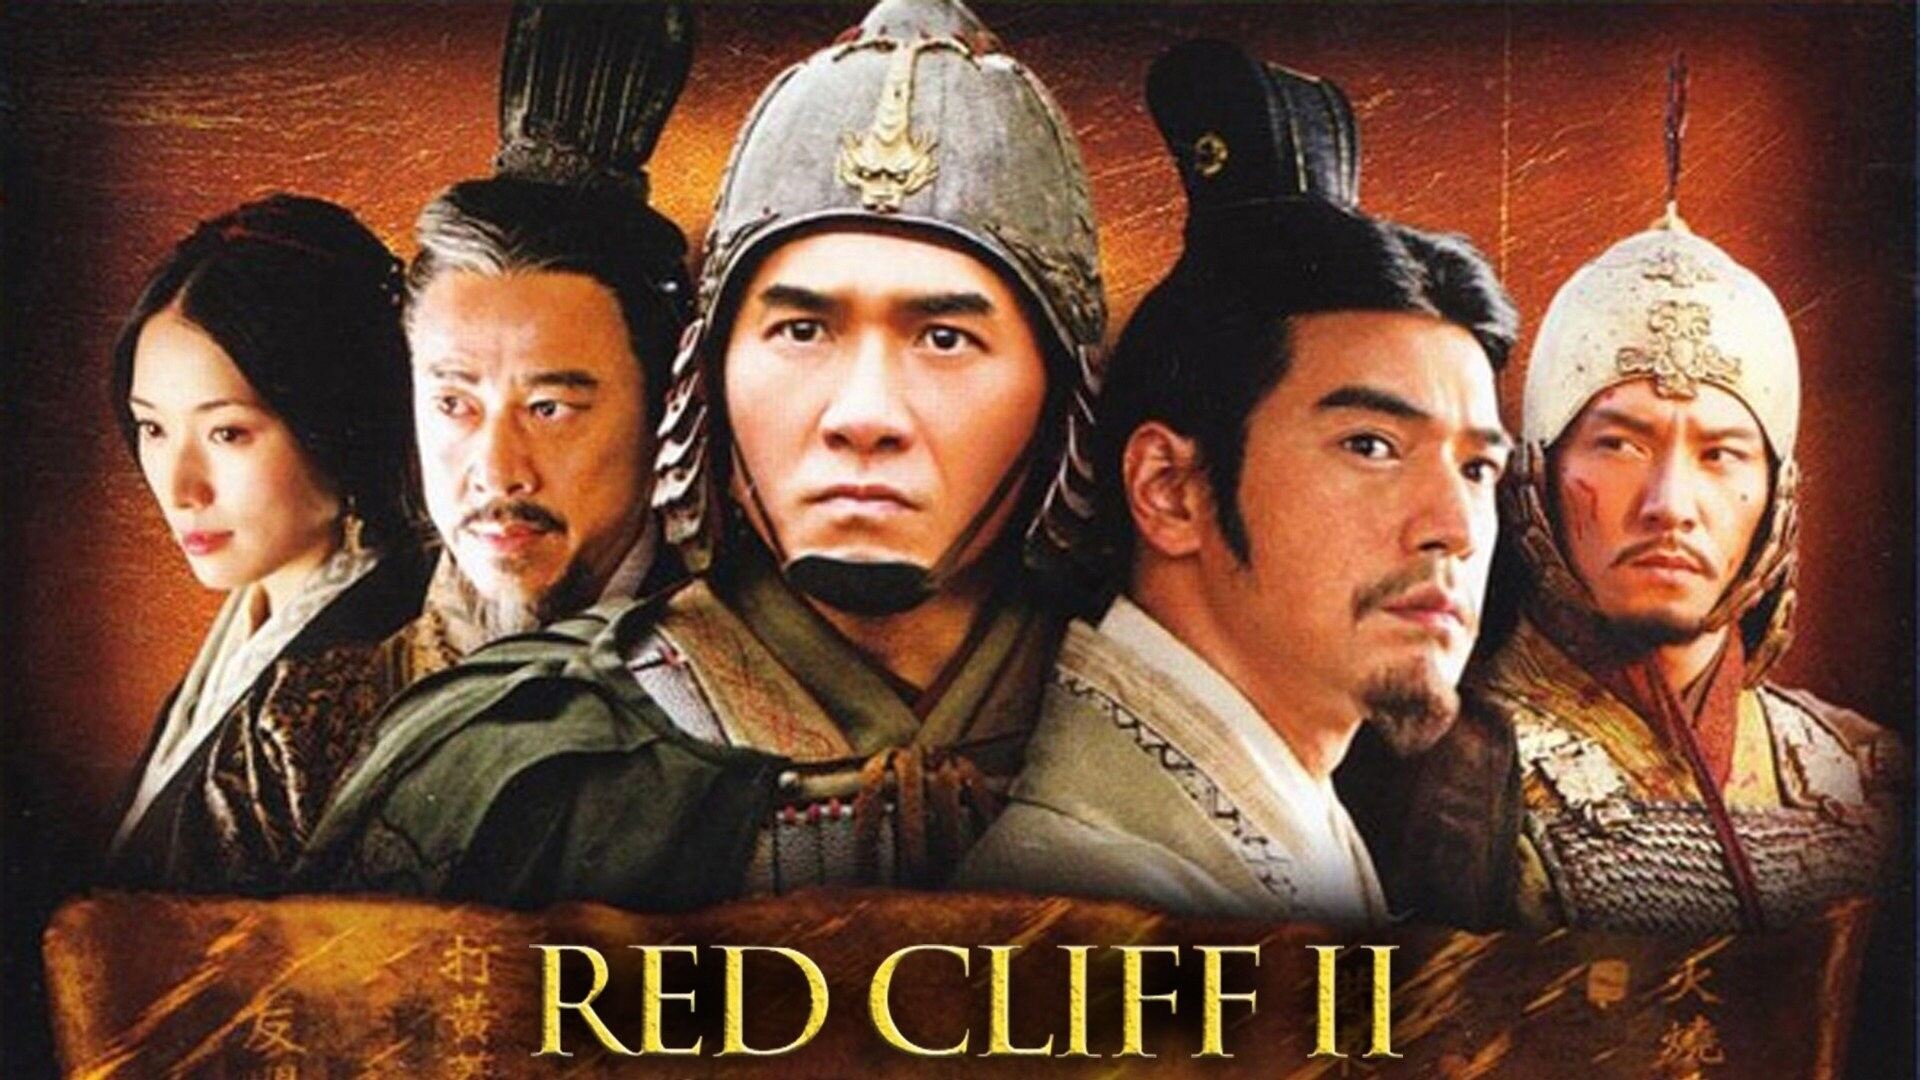 45-facts-about-the-movie-red-cliff-part-ii